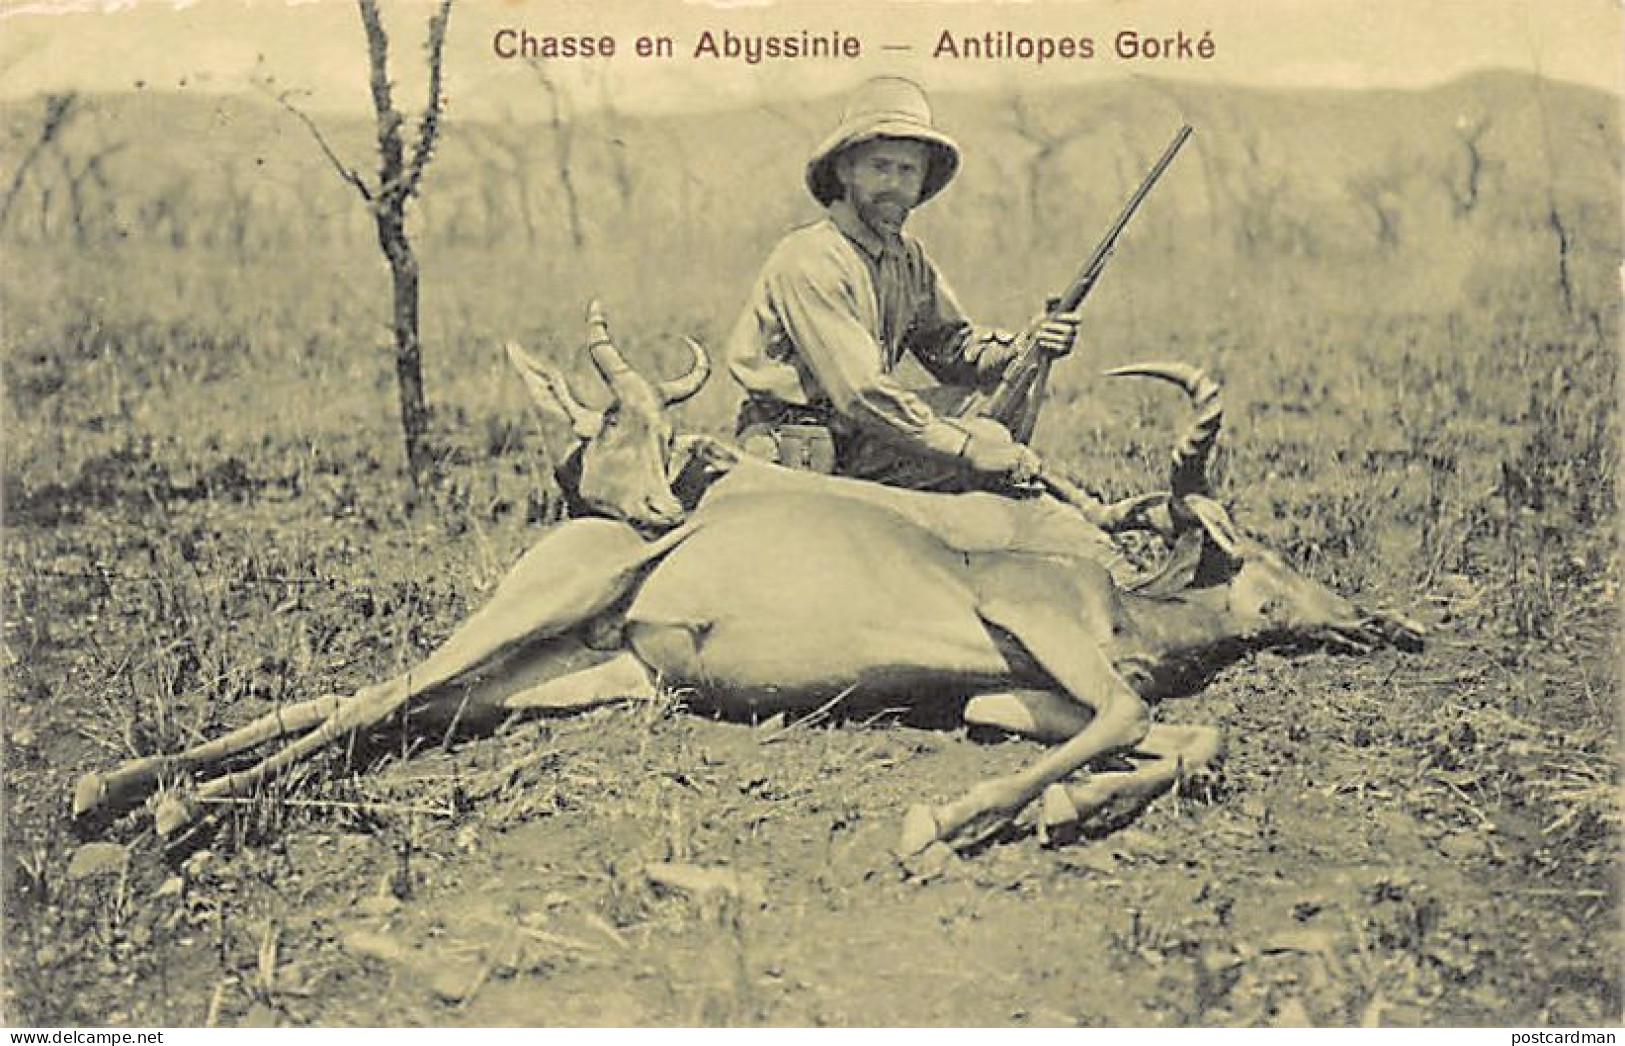 Ethiopia - Hunting In Abyssinia - Gorke Antelopes - Publ. J. A. Michel 6869 - Ethiopia